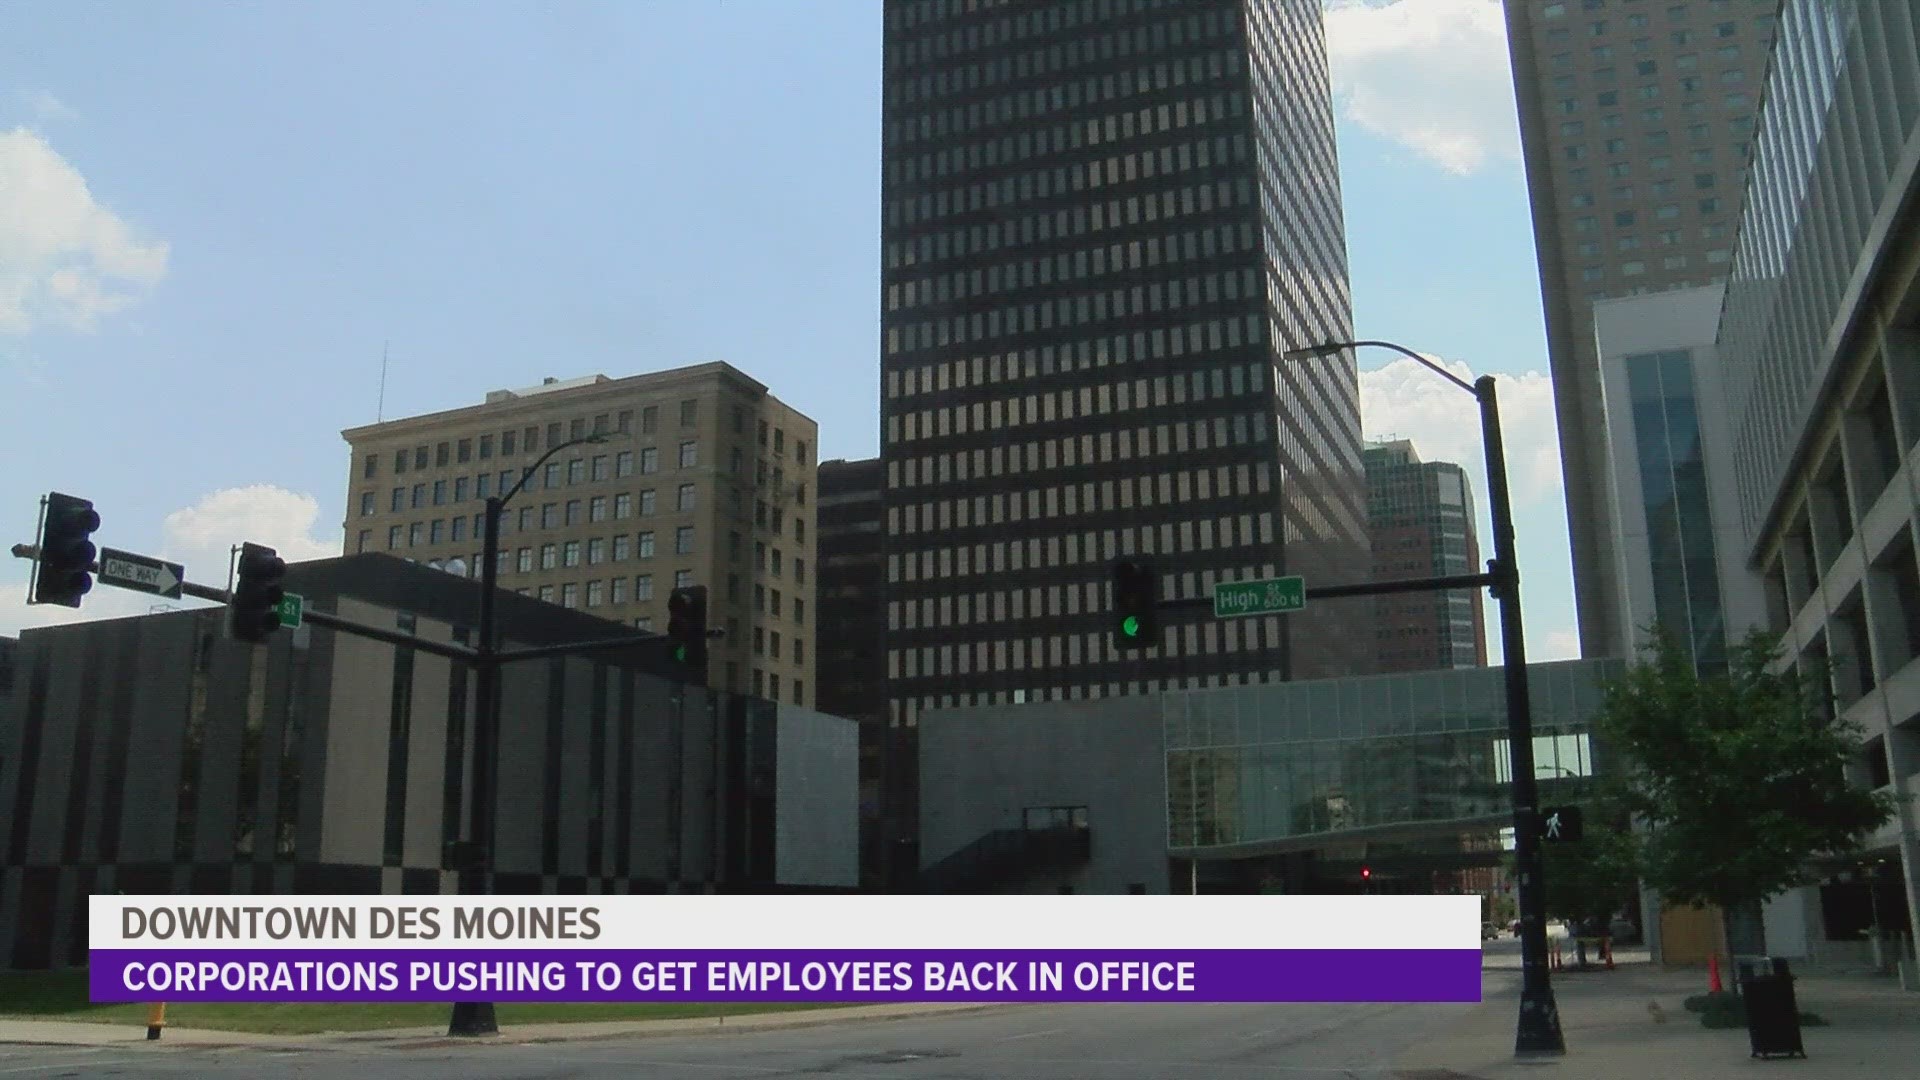 The COVID-19 pandemic allowed many employees to work from home, but some major businesses in downtown Des Moines are working to bring staff back to the office.